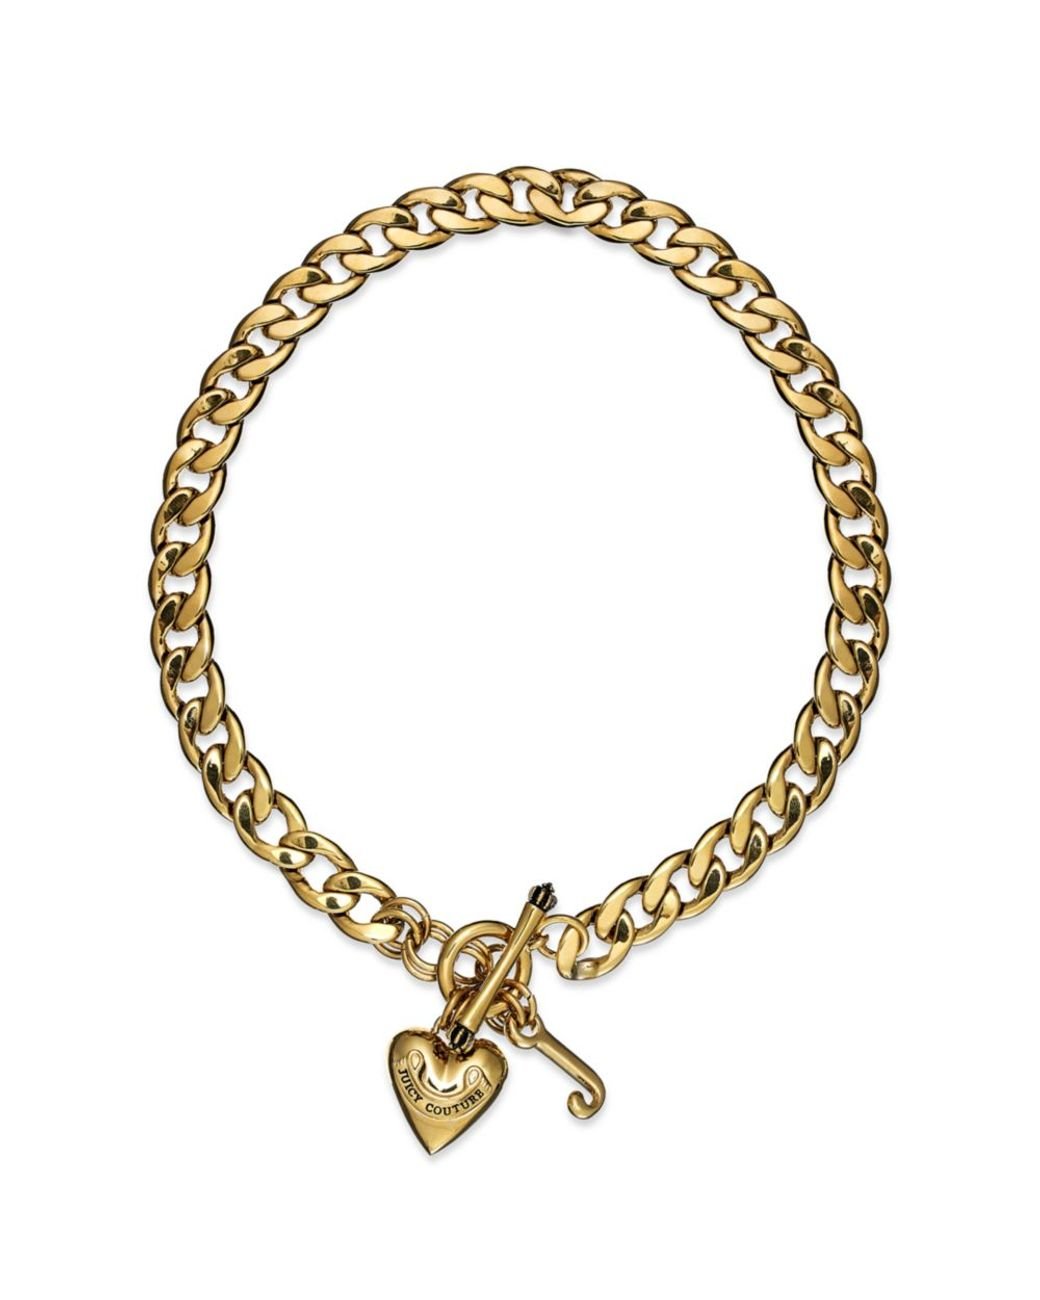 Juicy Couture Gold Tone Heart Charm Starter Collar Necklace in Metallic |  Lyst